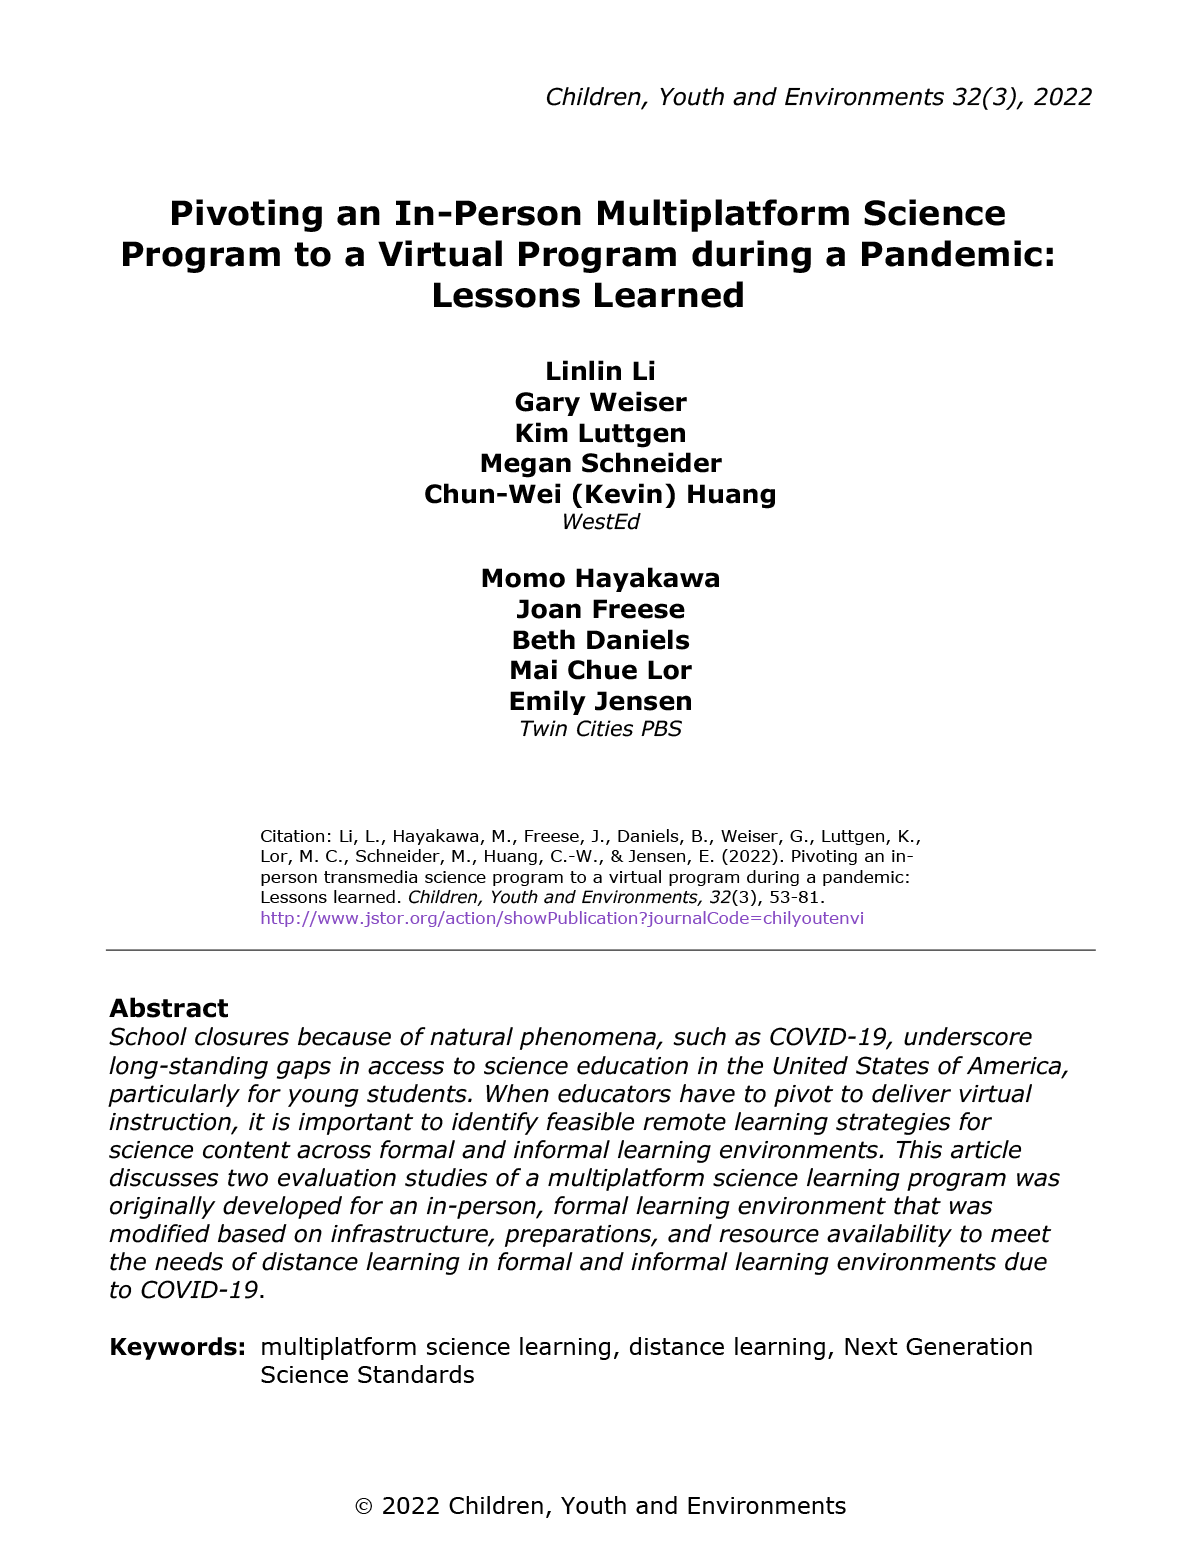 Pivoting an In-Person Multiplatform Science Program to a Virtual Program during a Pandemic: Lessons Learned